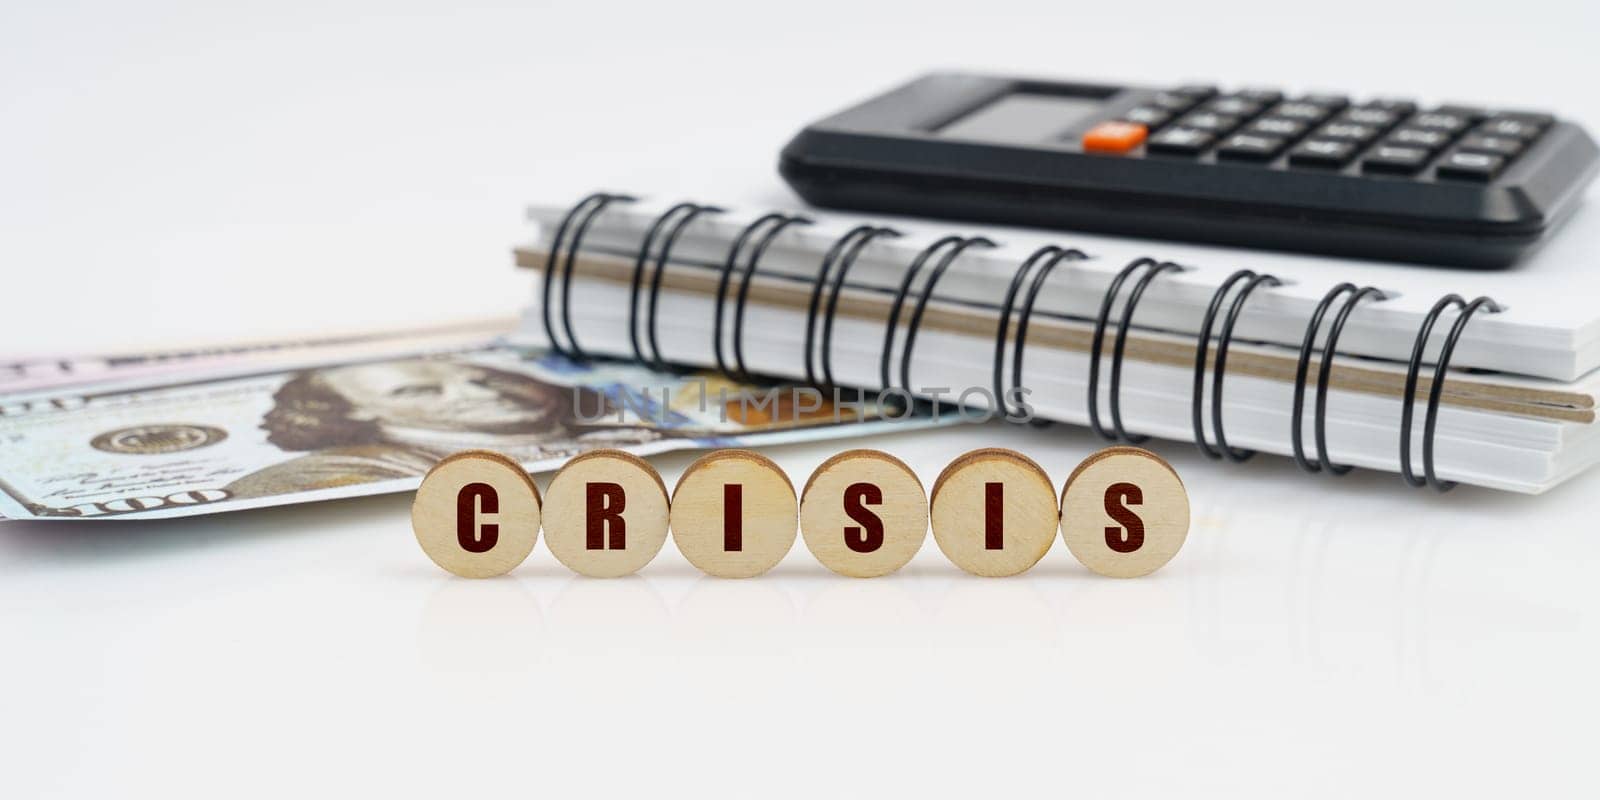 Business and finance concept. On a high surface lie a notepad, a calculator, dollars and wooden circles with the inscription - CRISIS